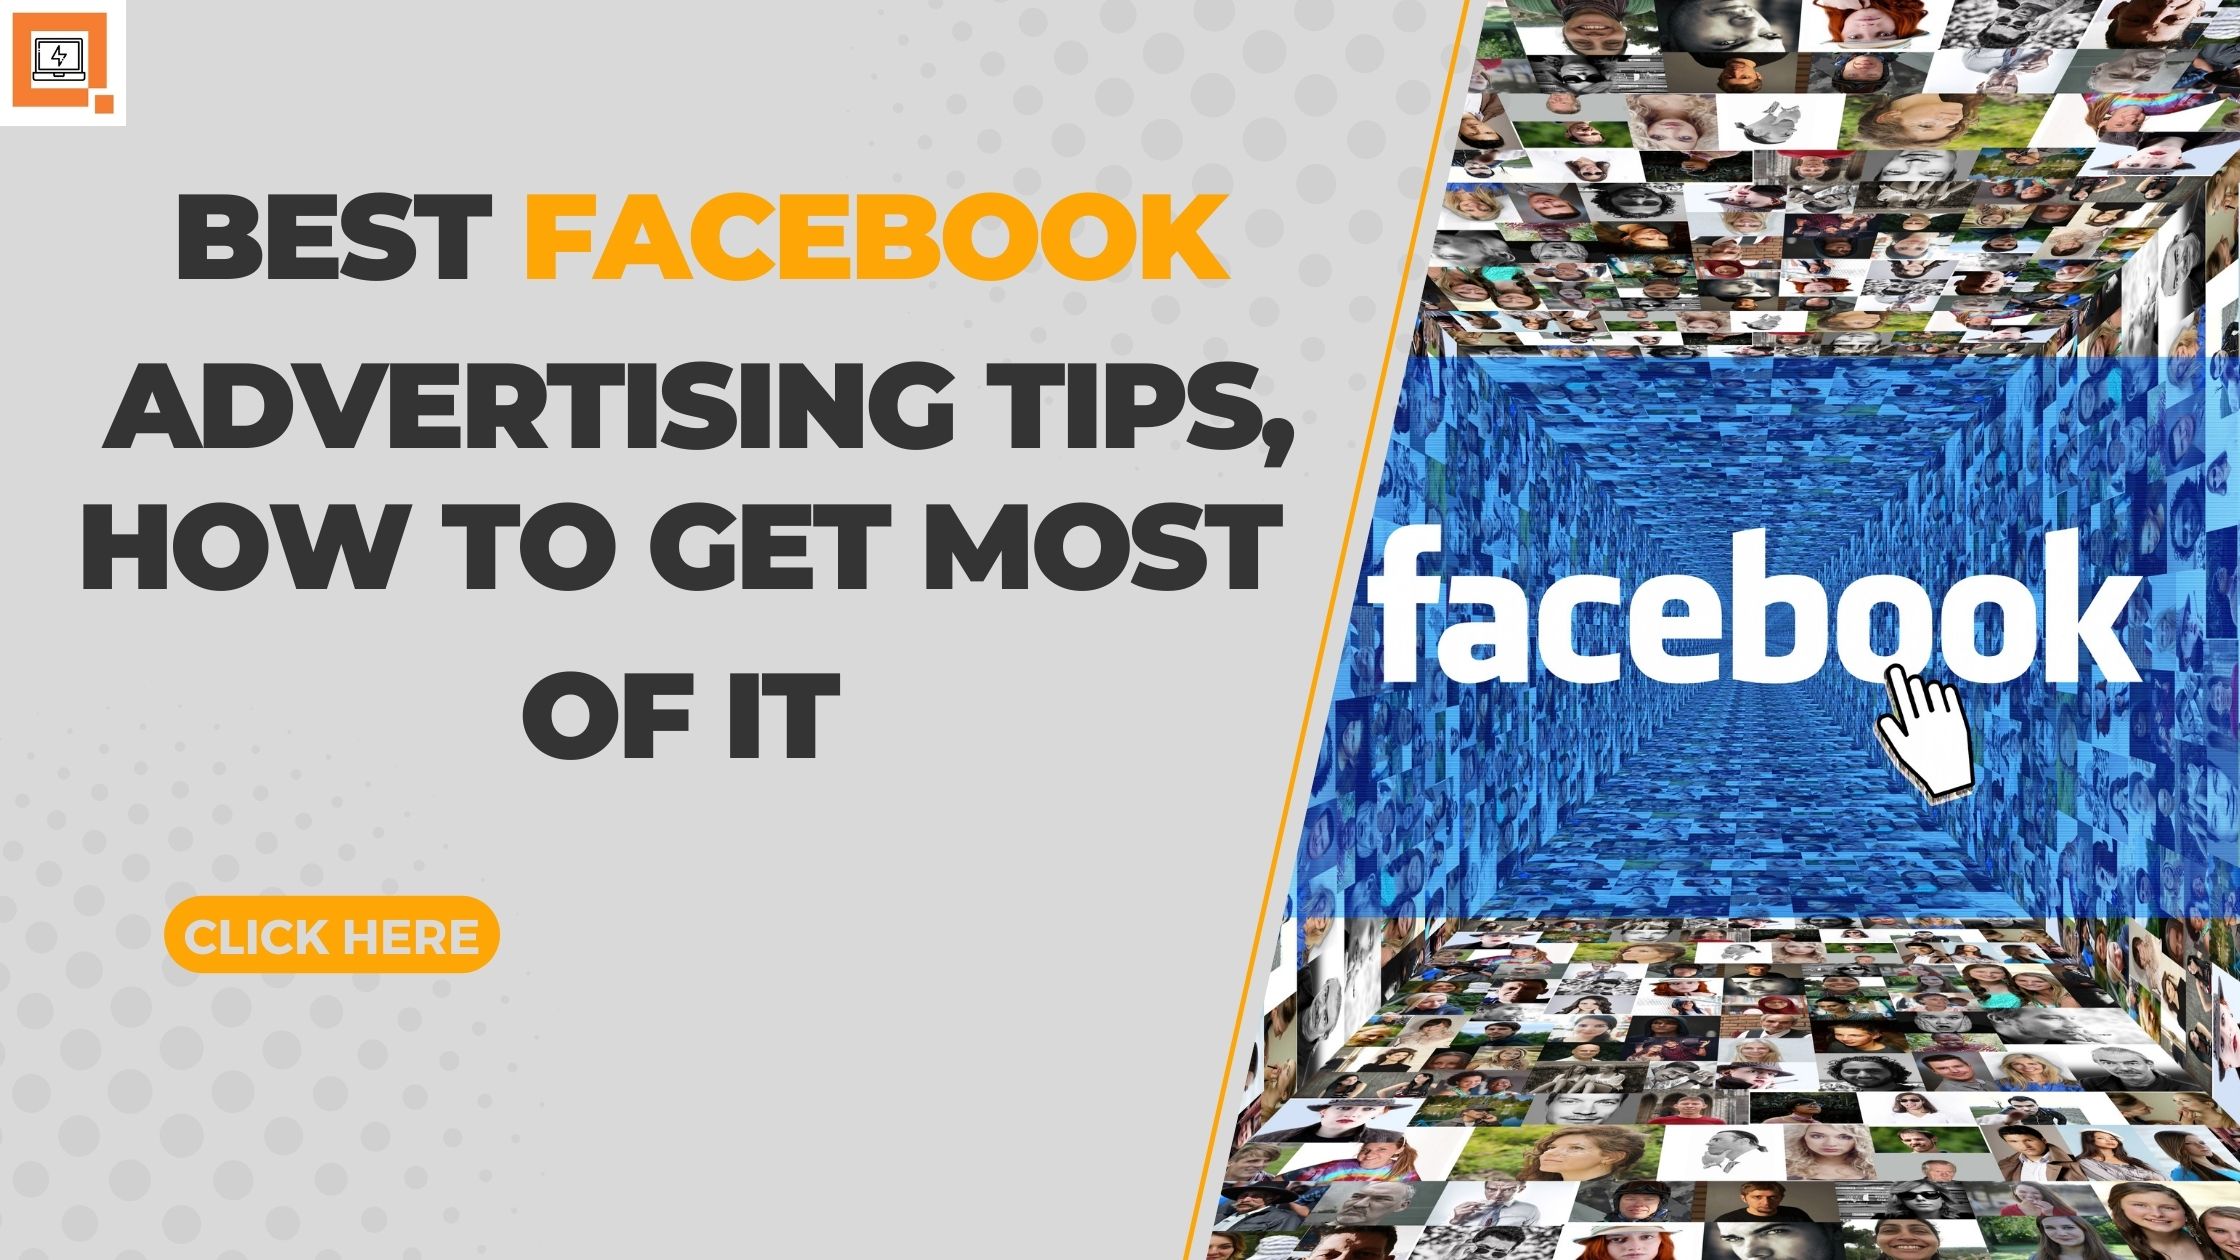 You are currently viewing Best Facebook Advertising Tips, How To Get Most of It.